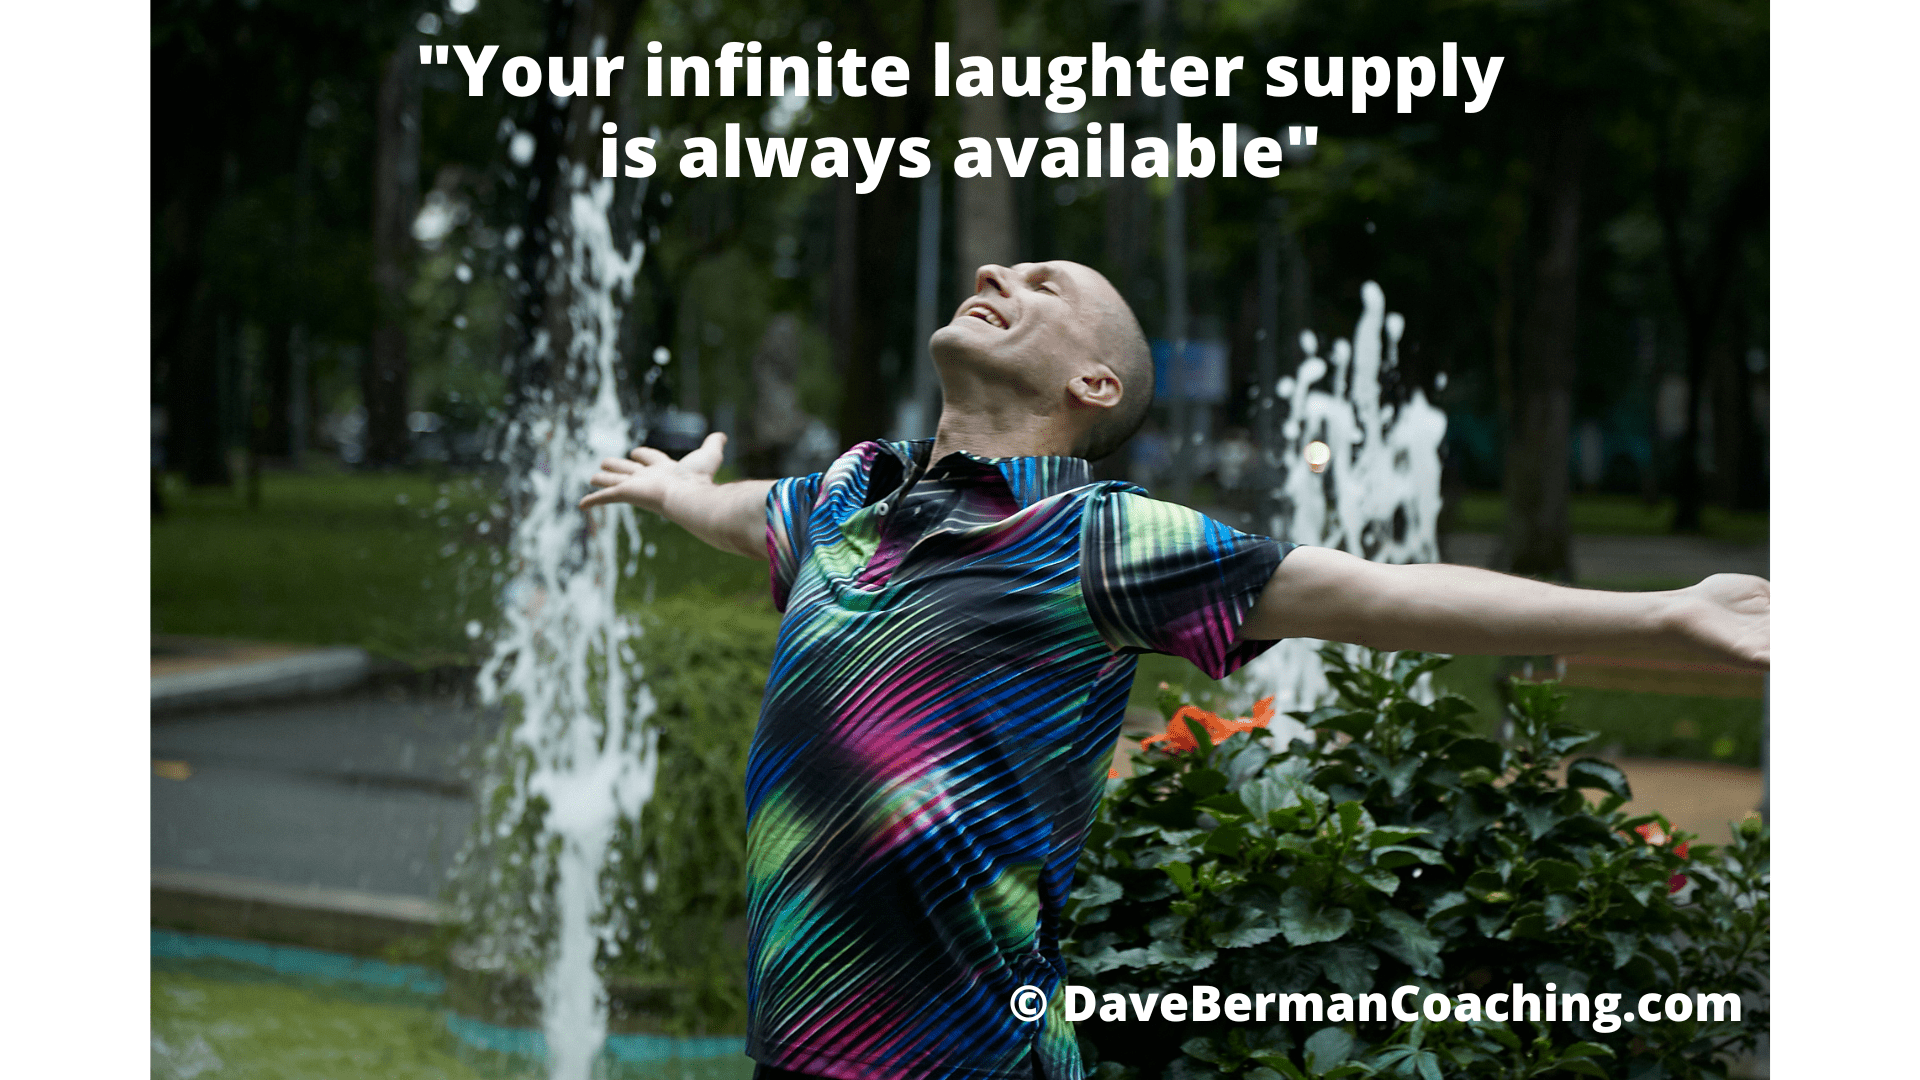 Dave Berman laughs with his head tilted back and arms outstretched in front of two big fountains in a Saigon park. Words are the first Principle of Laughter: "Your infinite laughter supply is always available." © DaveBermanCoaching.com